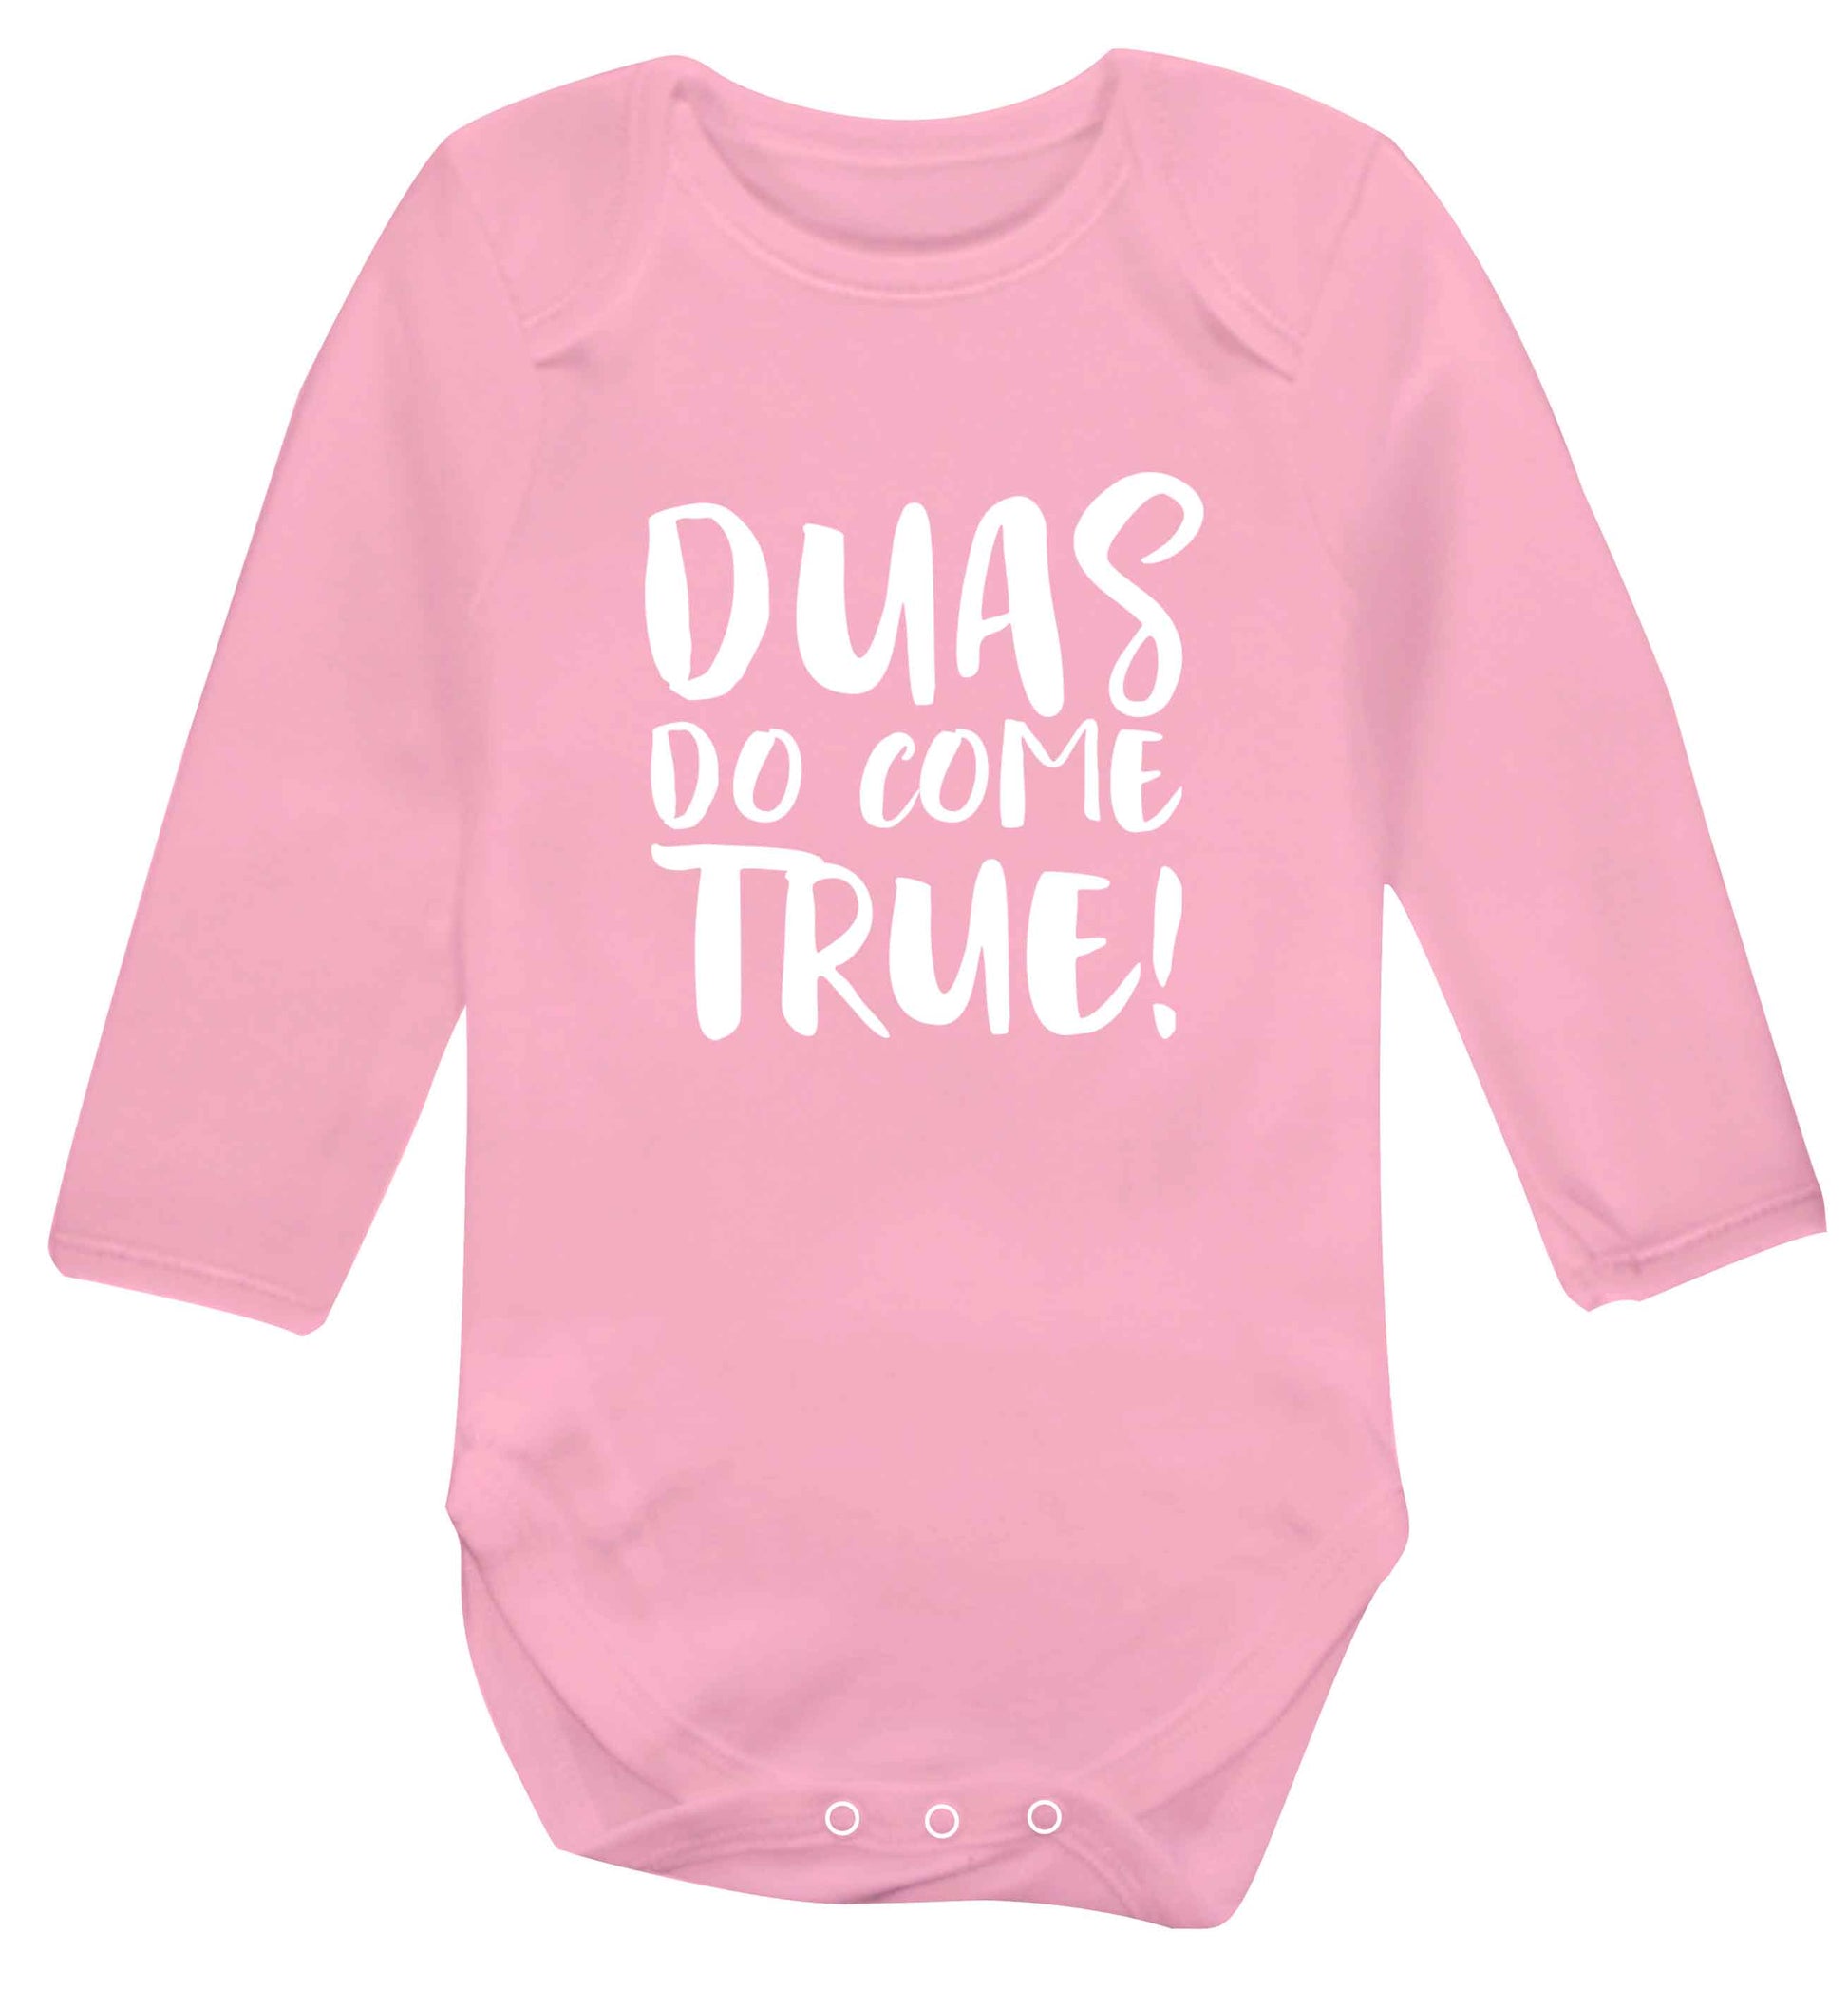 Duas do come true baby vest long sleeved pale pink 6-12 months